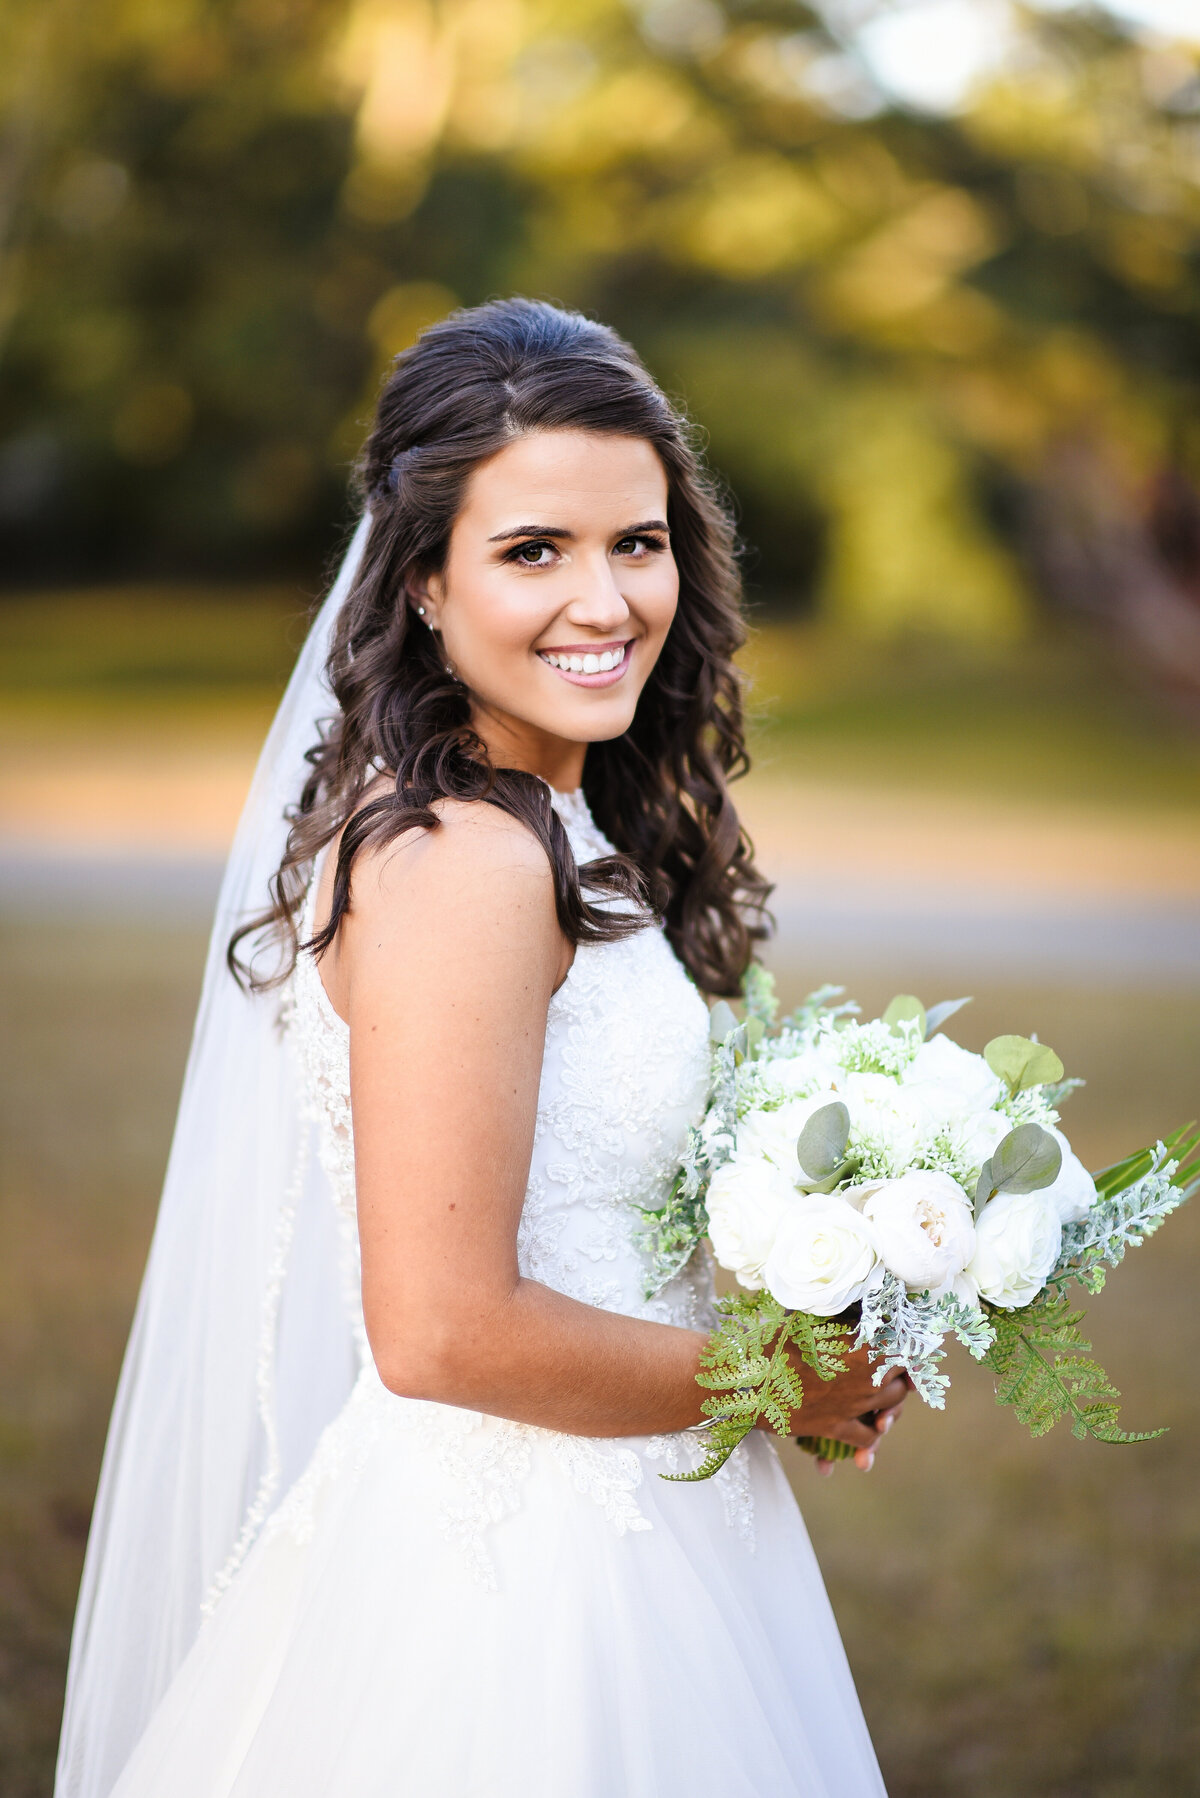 Beautiful bridal portrait photography: Bride turns to the camera outdoors in Mississippi